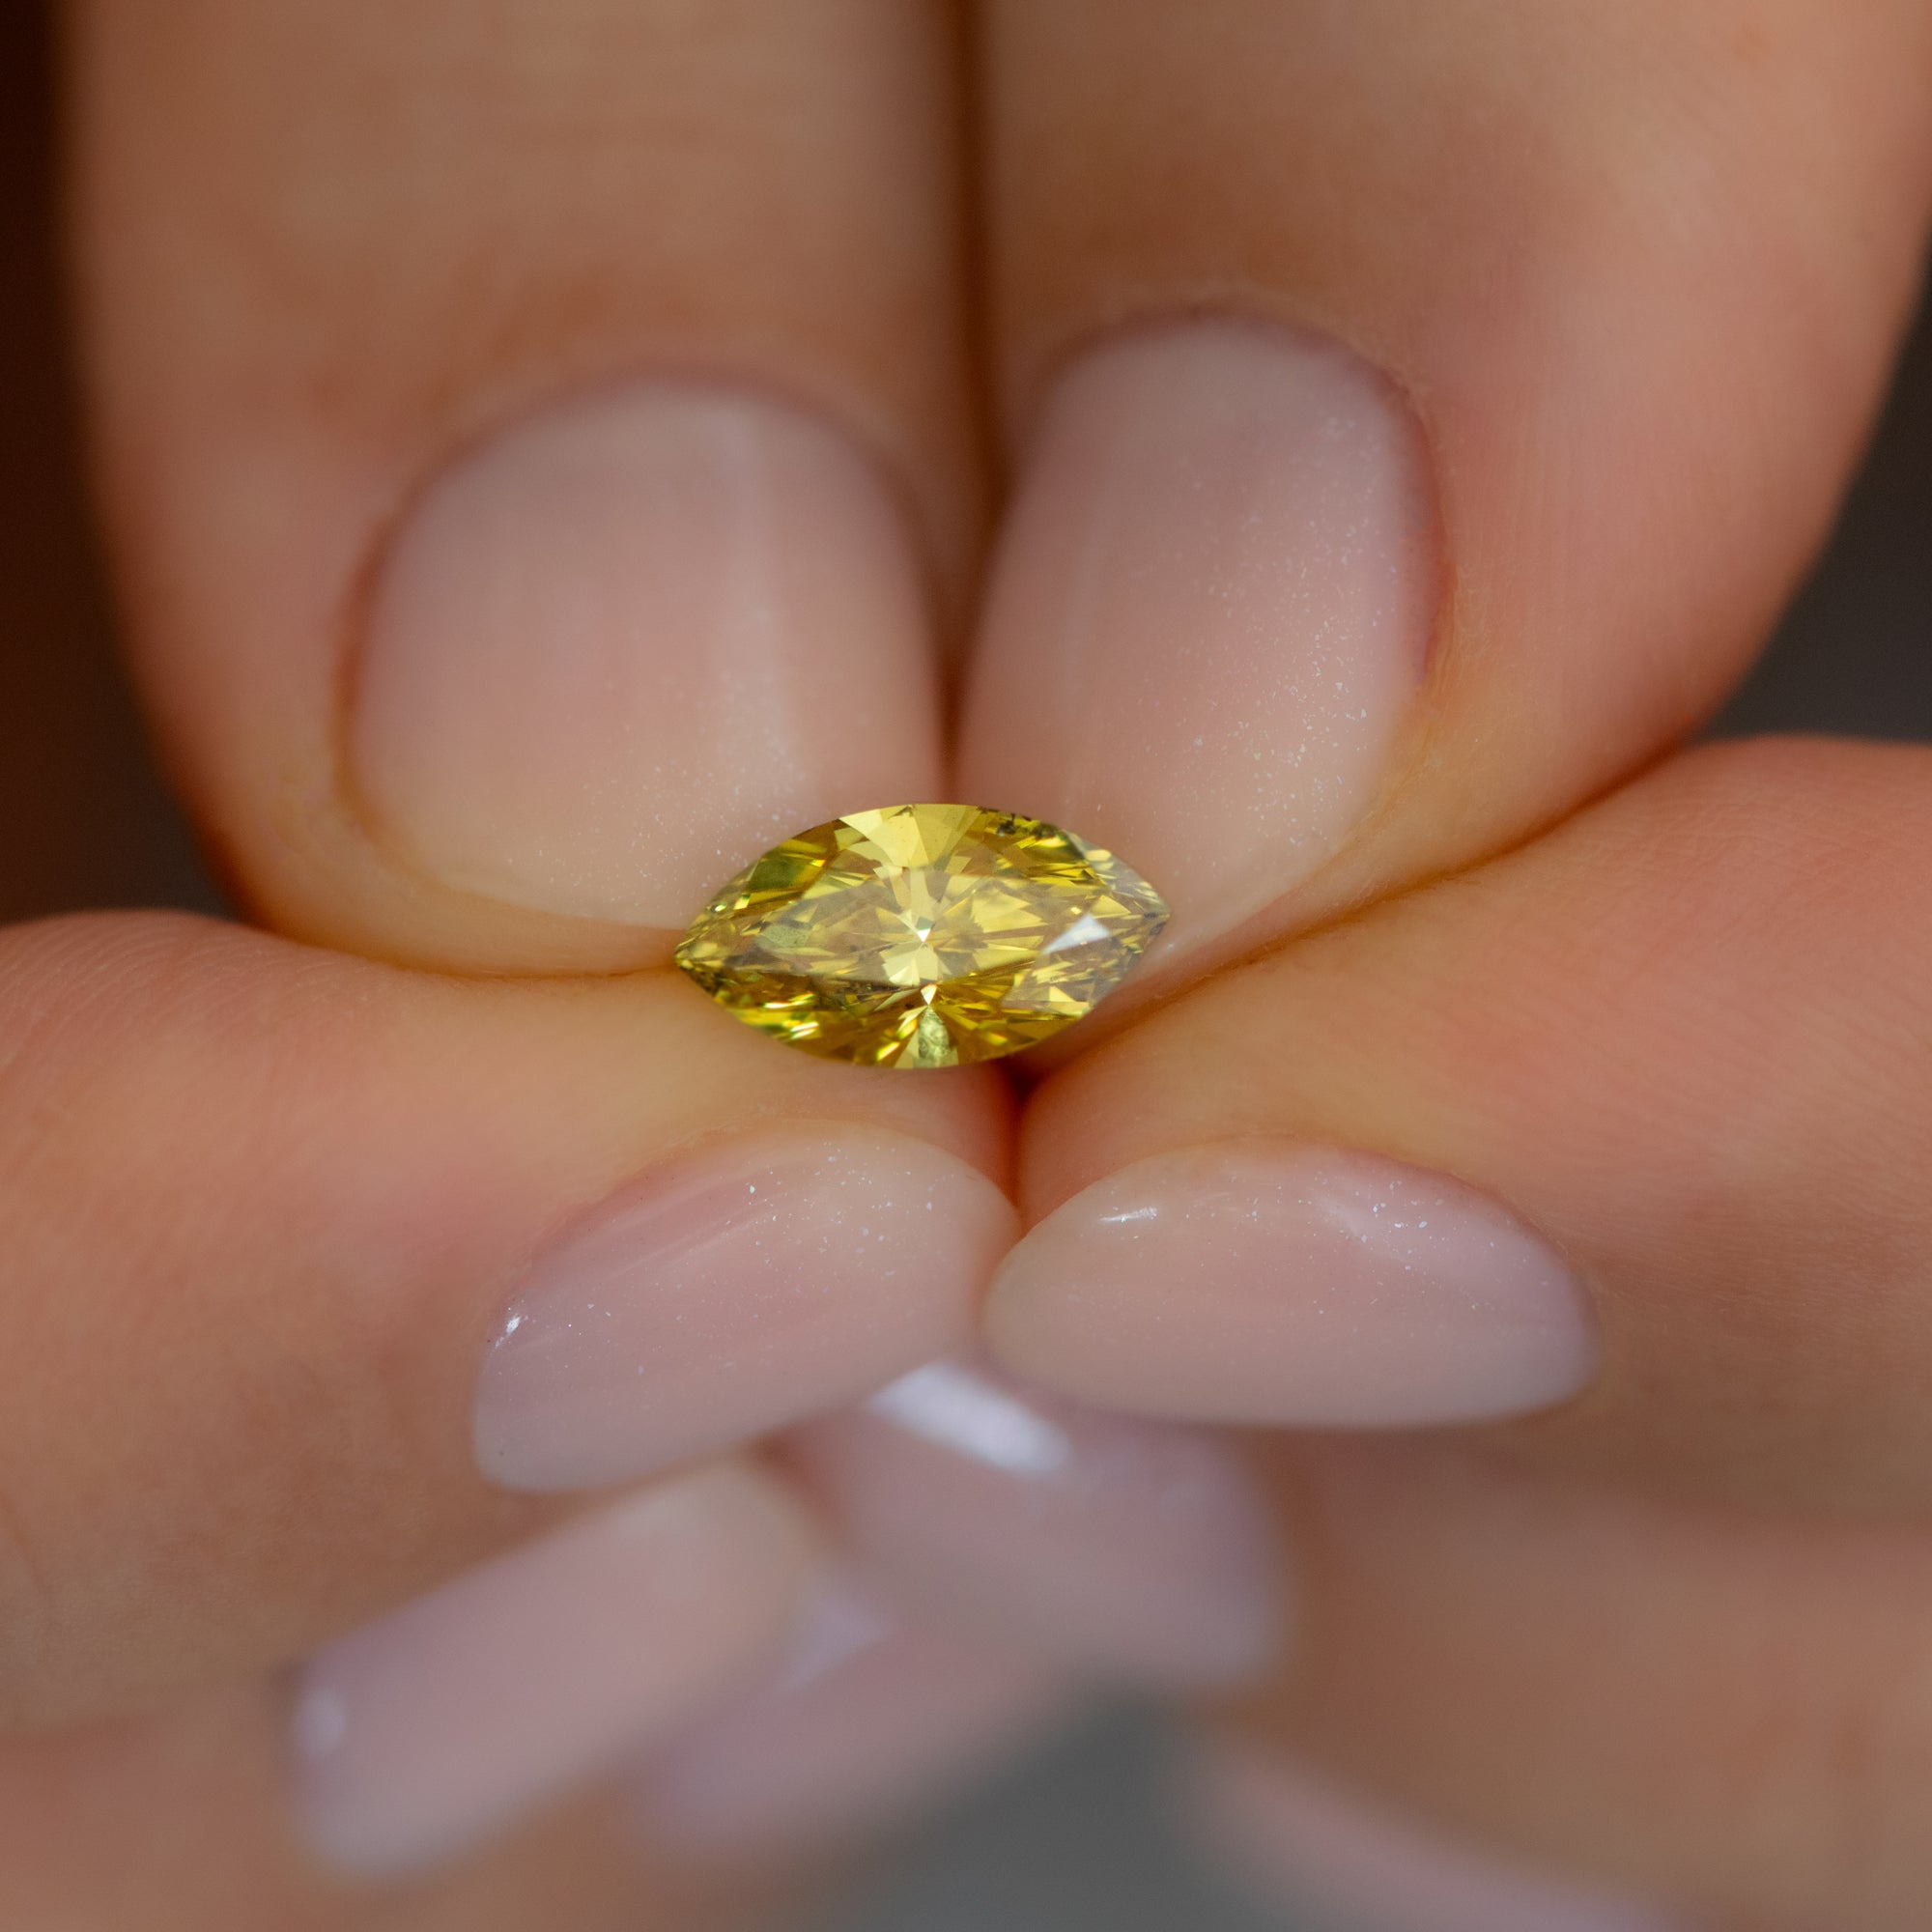 This 15-Carat Yellow Diamond Ring Could Fetch $1.2 Million at Auction